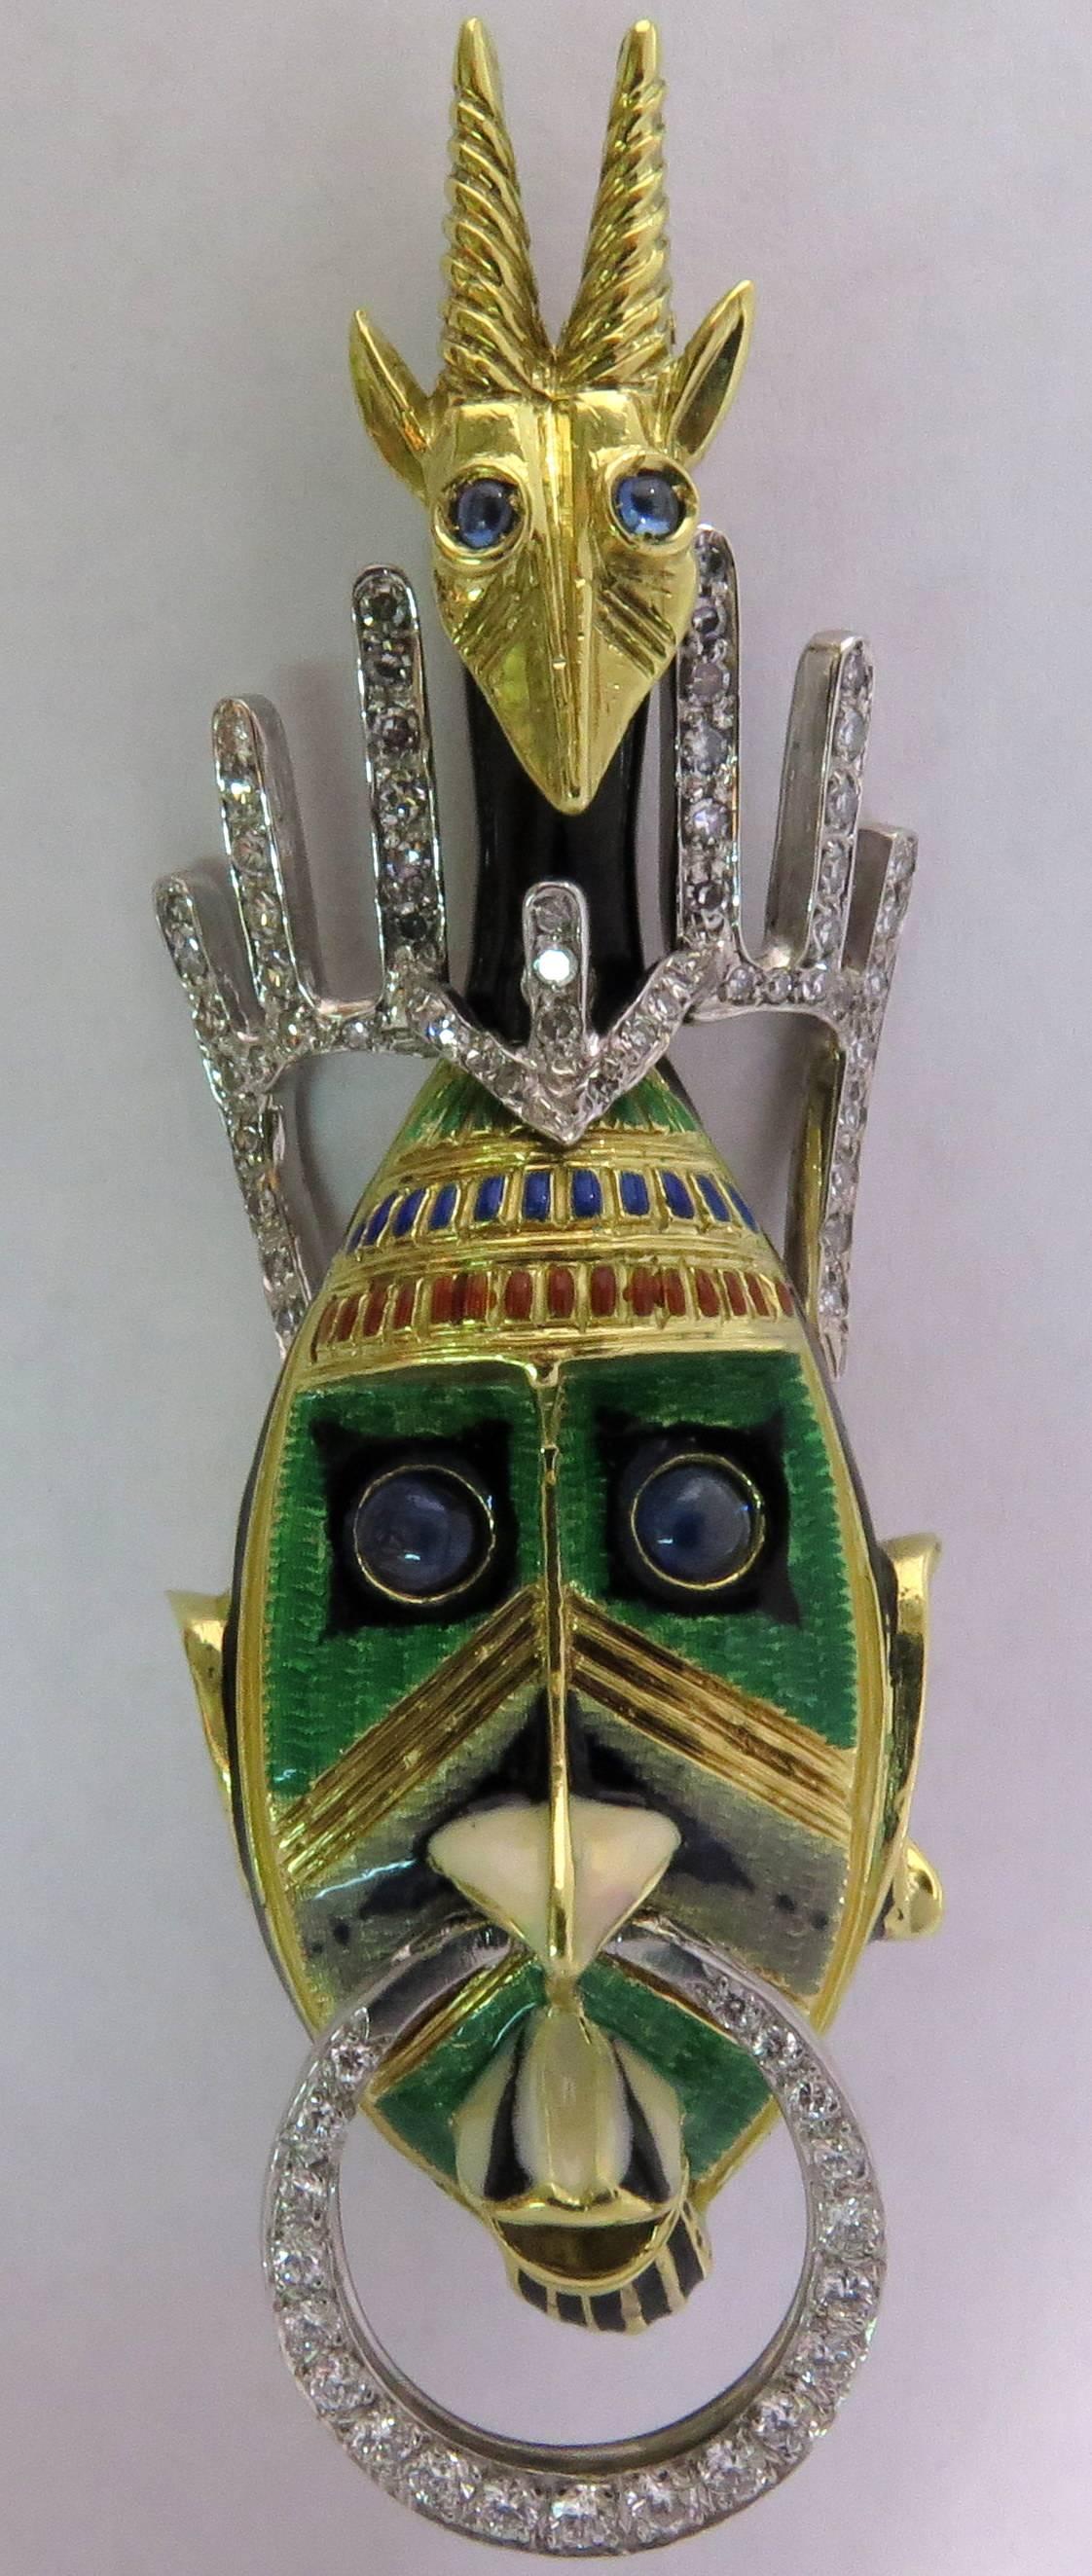 Amazing 18K yellow gold and platinum prong set diamond vividly enameled pin.  This pin is exquisitely detailed with a movable diamond nose ring and figural head dress. Both faces feature cabochon sapphire eyes. If you are looking for the unusual and